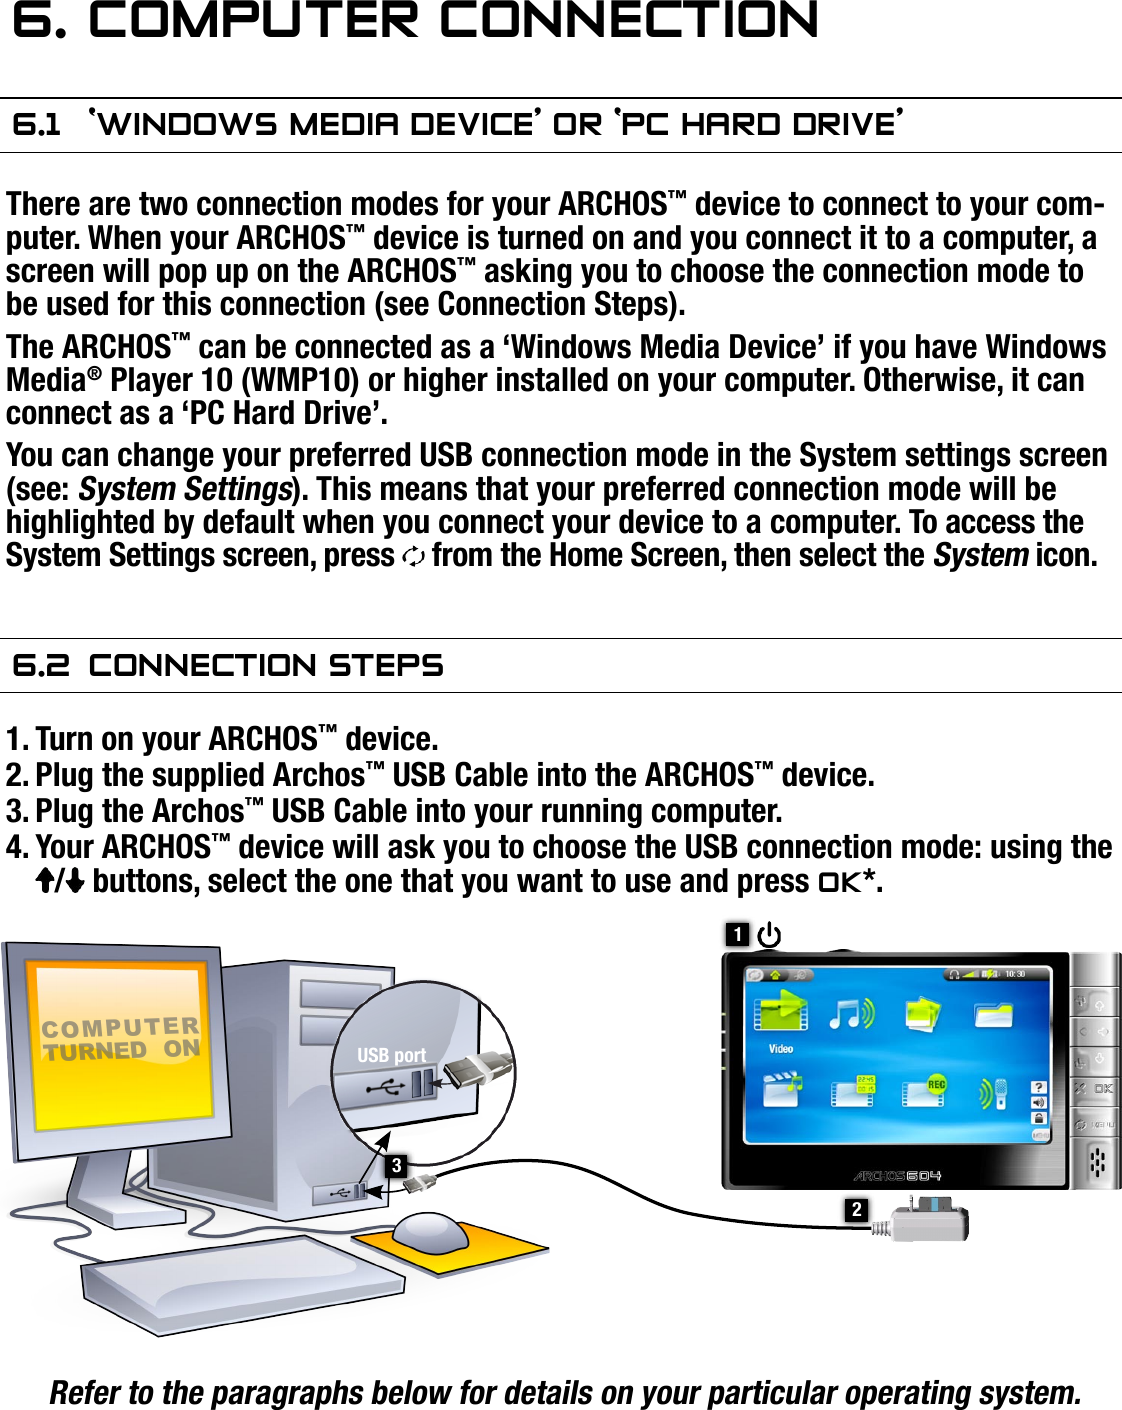 504/604MANUAL V2.0COMPUTER CONNECTION   &gt;   p. 366. COMPuTer COnneCTIOn6.1  ‘wIndOws MedIa deVICe’ Or ‘PC hard drIVe’There are two connection modes for your ARCHOS™ device to connect to your com-puter. When your ARCHOS™ device is turned on and you connect it to a computer, a screen will pop up on the ARCHOS™ asking you to choose the connection mode to be used for this connection (see Connection Steps).The ARCHOS™ can be connected as a ‘Windows Media Device’ if you have Windows Media® Player 10 (WMP10) or higher installed on your computer. Otherwise, it can connect as a ‘PC Hard Drive’.You can change your preferred USB connection mode in the System settings screen (see: System Settings). This means that your preferred connection mode will be highlighted by default when you connect your device to a computer. To access the System Settings screen, press   from the Home Screen, then select the System icon.6.2  COnneCTIOn sTePsTurn on your ARCHOS™ device.Plug the supplied Archos™ USB Cable into the ARCHOS™ device.Plug the Archos™ USB Cable into your running computer.Your ARCHOS™ device will ask you to choose the USB connection mode: using the /  buttons, select the one that you want to use and press OK*.Refer to the paragraphs below for details on your particular operating system.* If you select ‘Charge only’, your device will just charge its batteries via the USB cable. You can use it as normal. At any time, you will be able to enable the USB con-nection by selecting the Enable USB menu item in the Home Screen.1.2.3.4.21COMPUTER TURNED  ONUSB port3